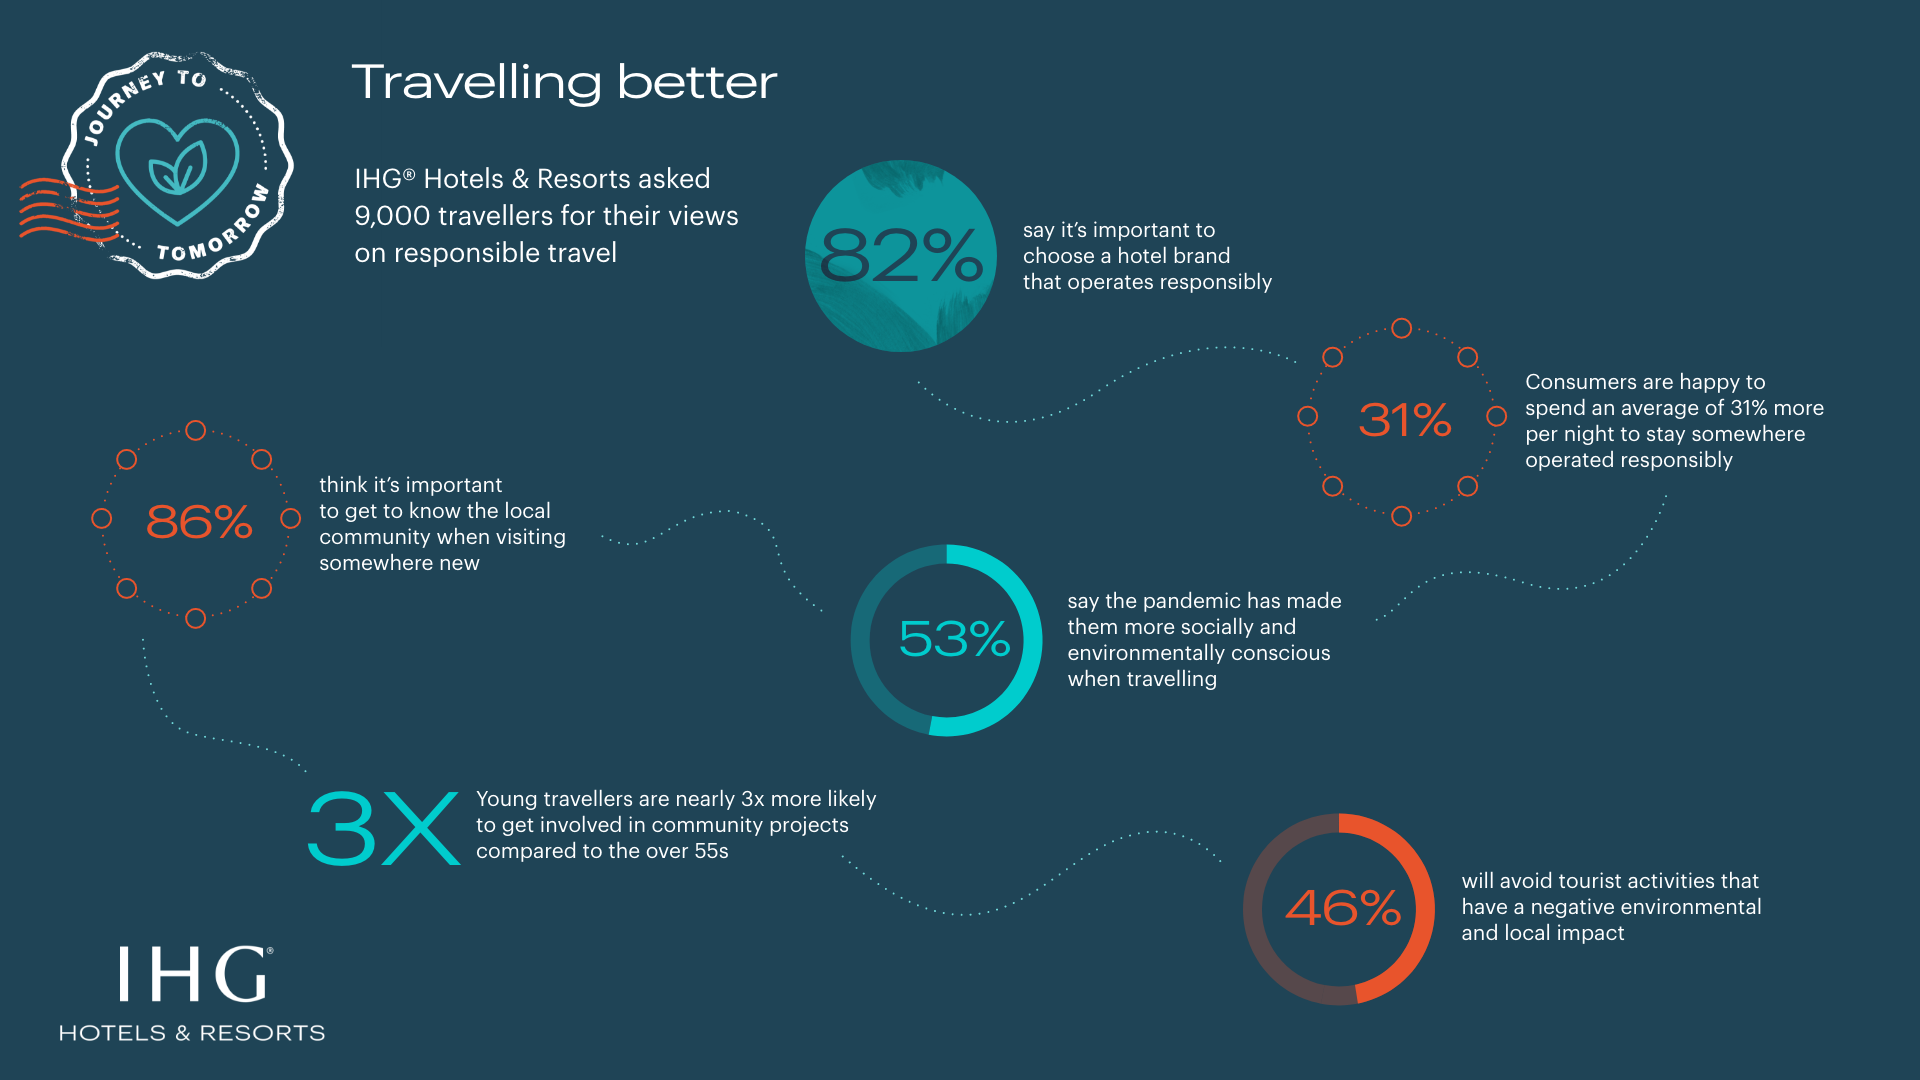 ihg hotels resorts releases survey highlighting more responsible travellers